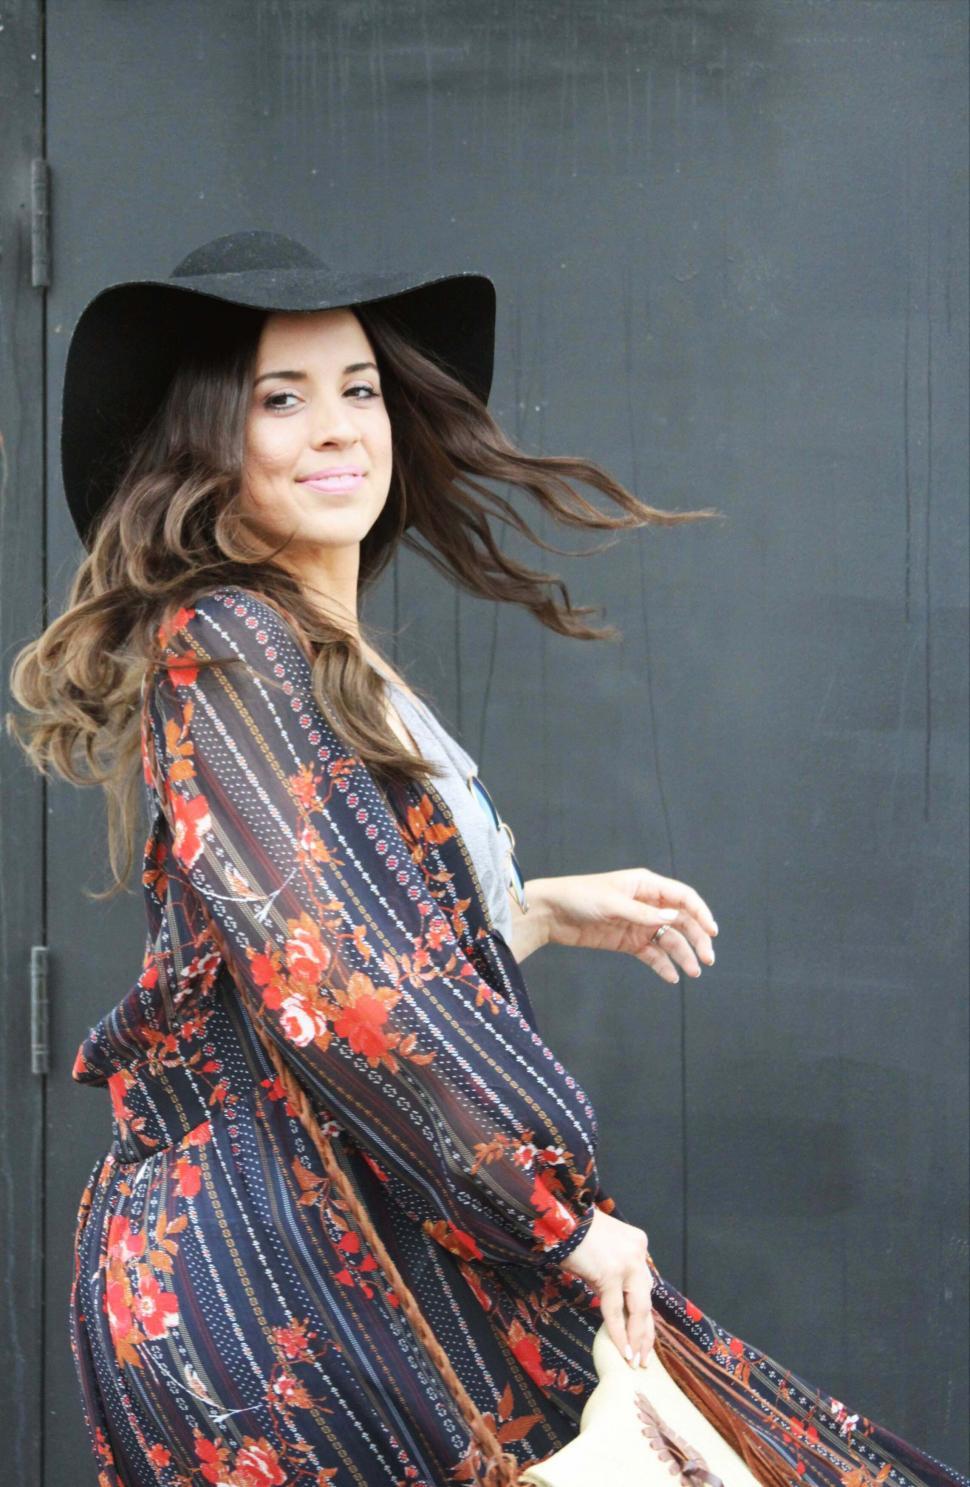 Free Image of Pregnant woman in floral dress with cowboy hat 